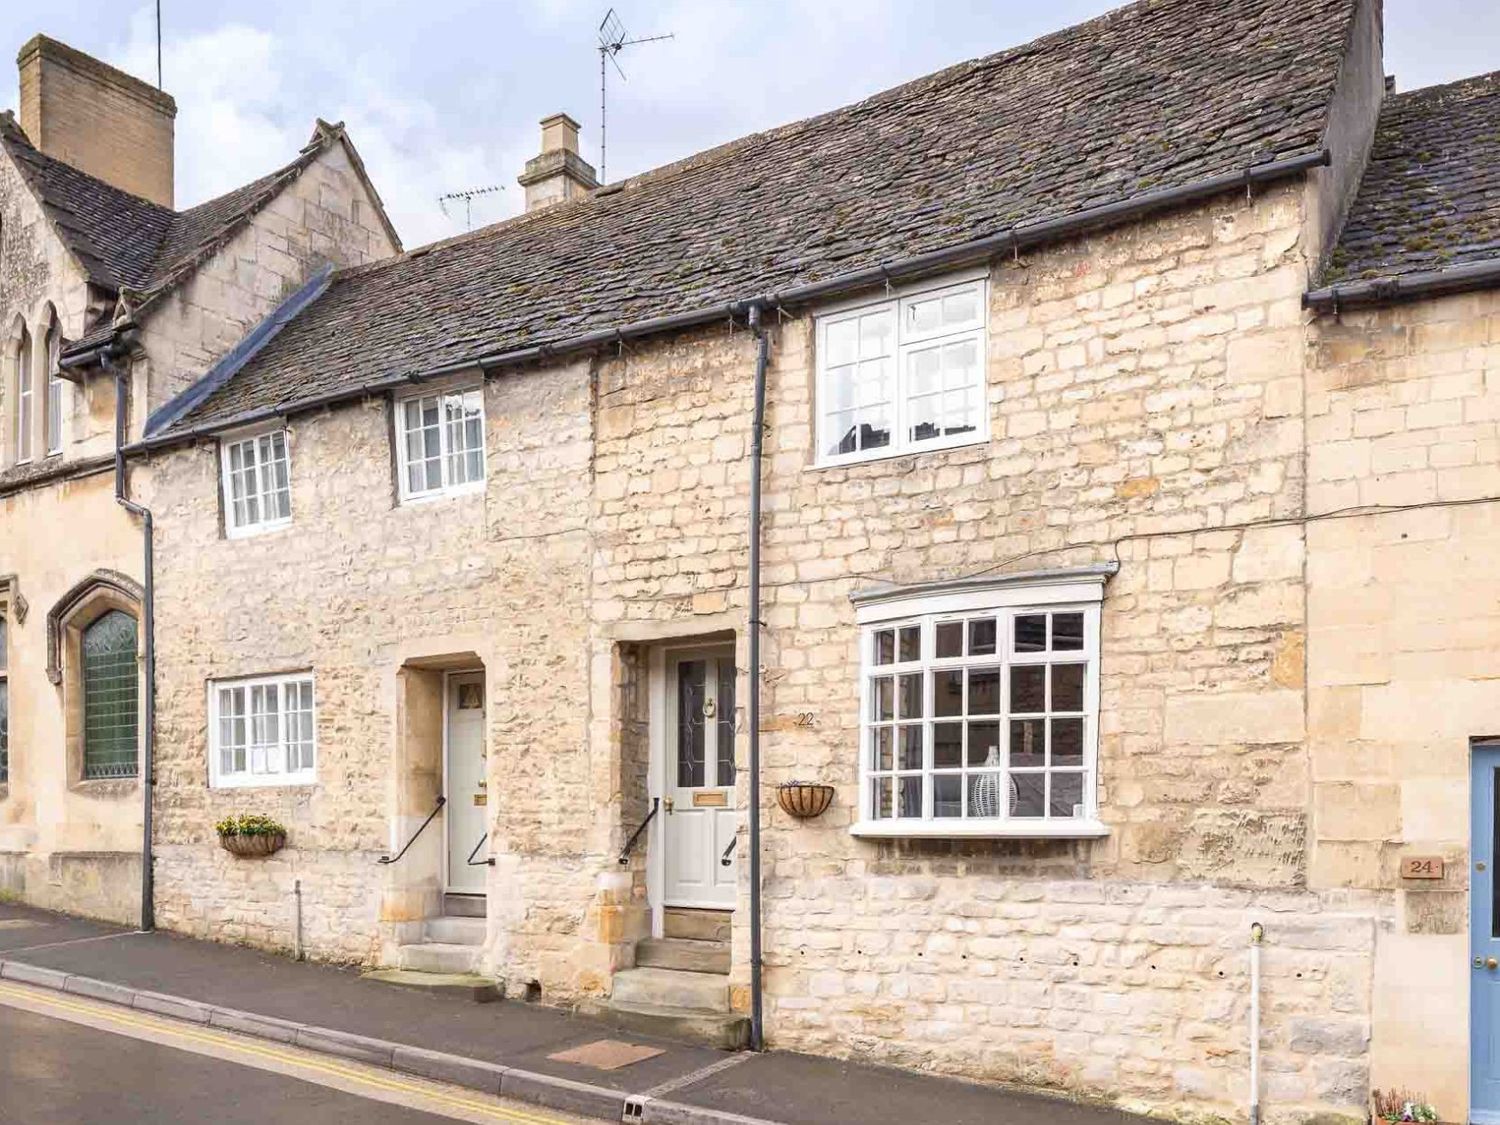 Miller's Cottage (Winchcombe) - Cotswolds - 1091287 - photo 1